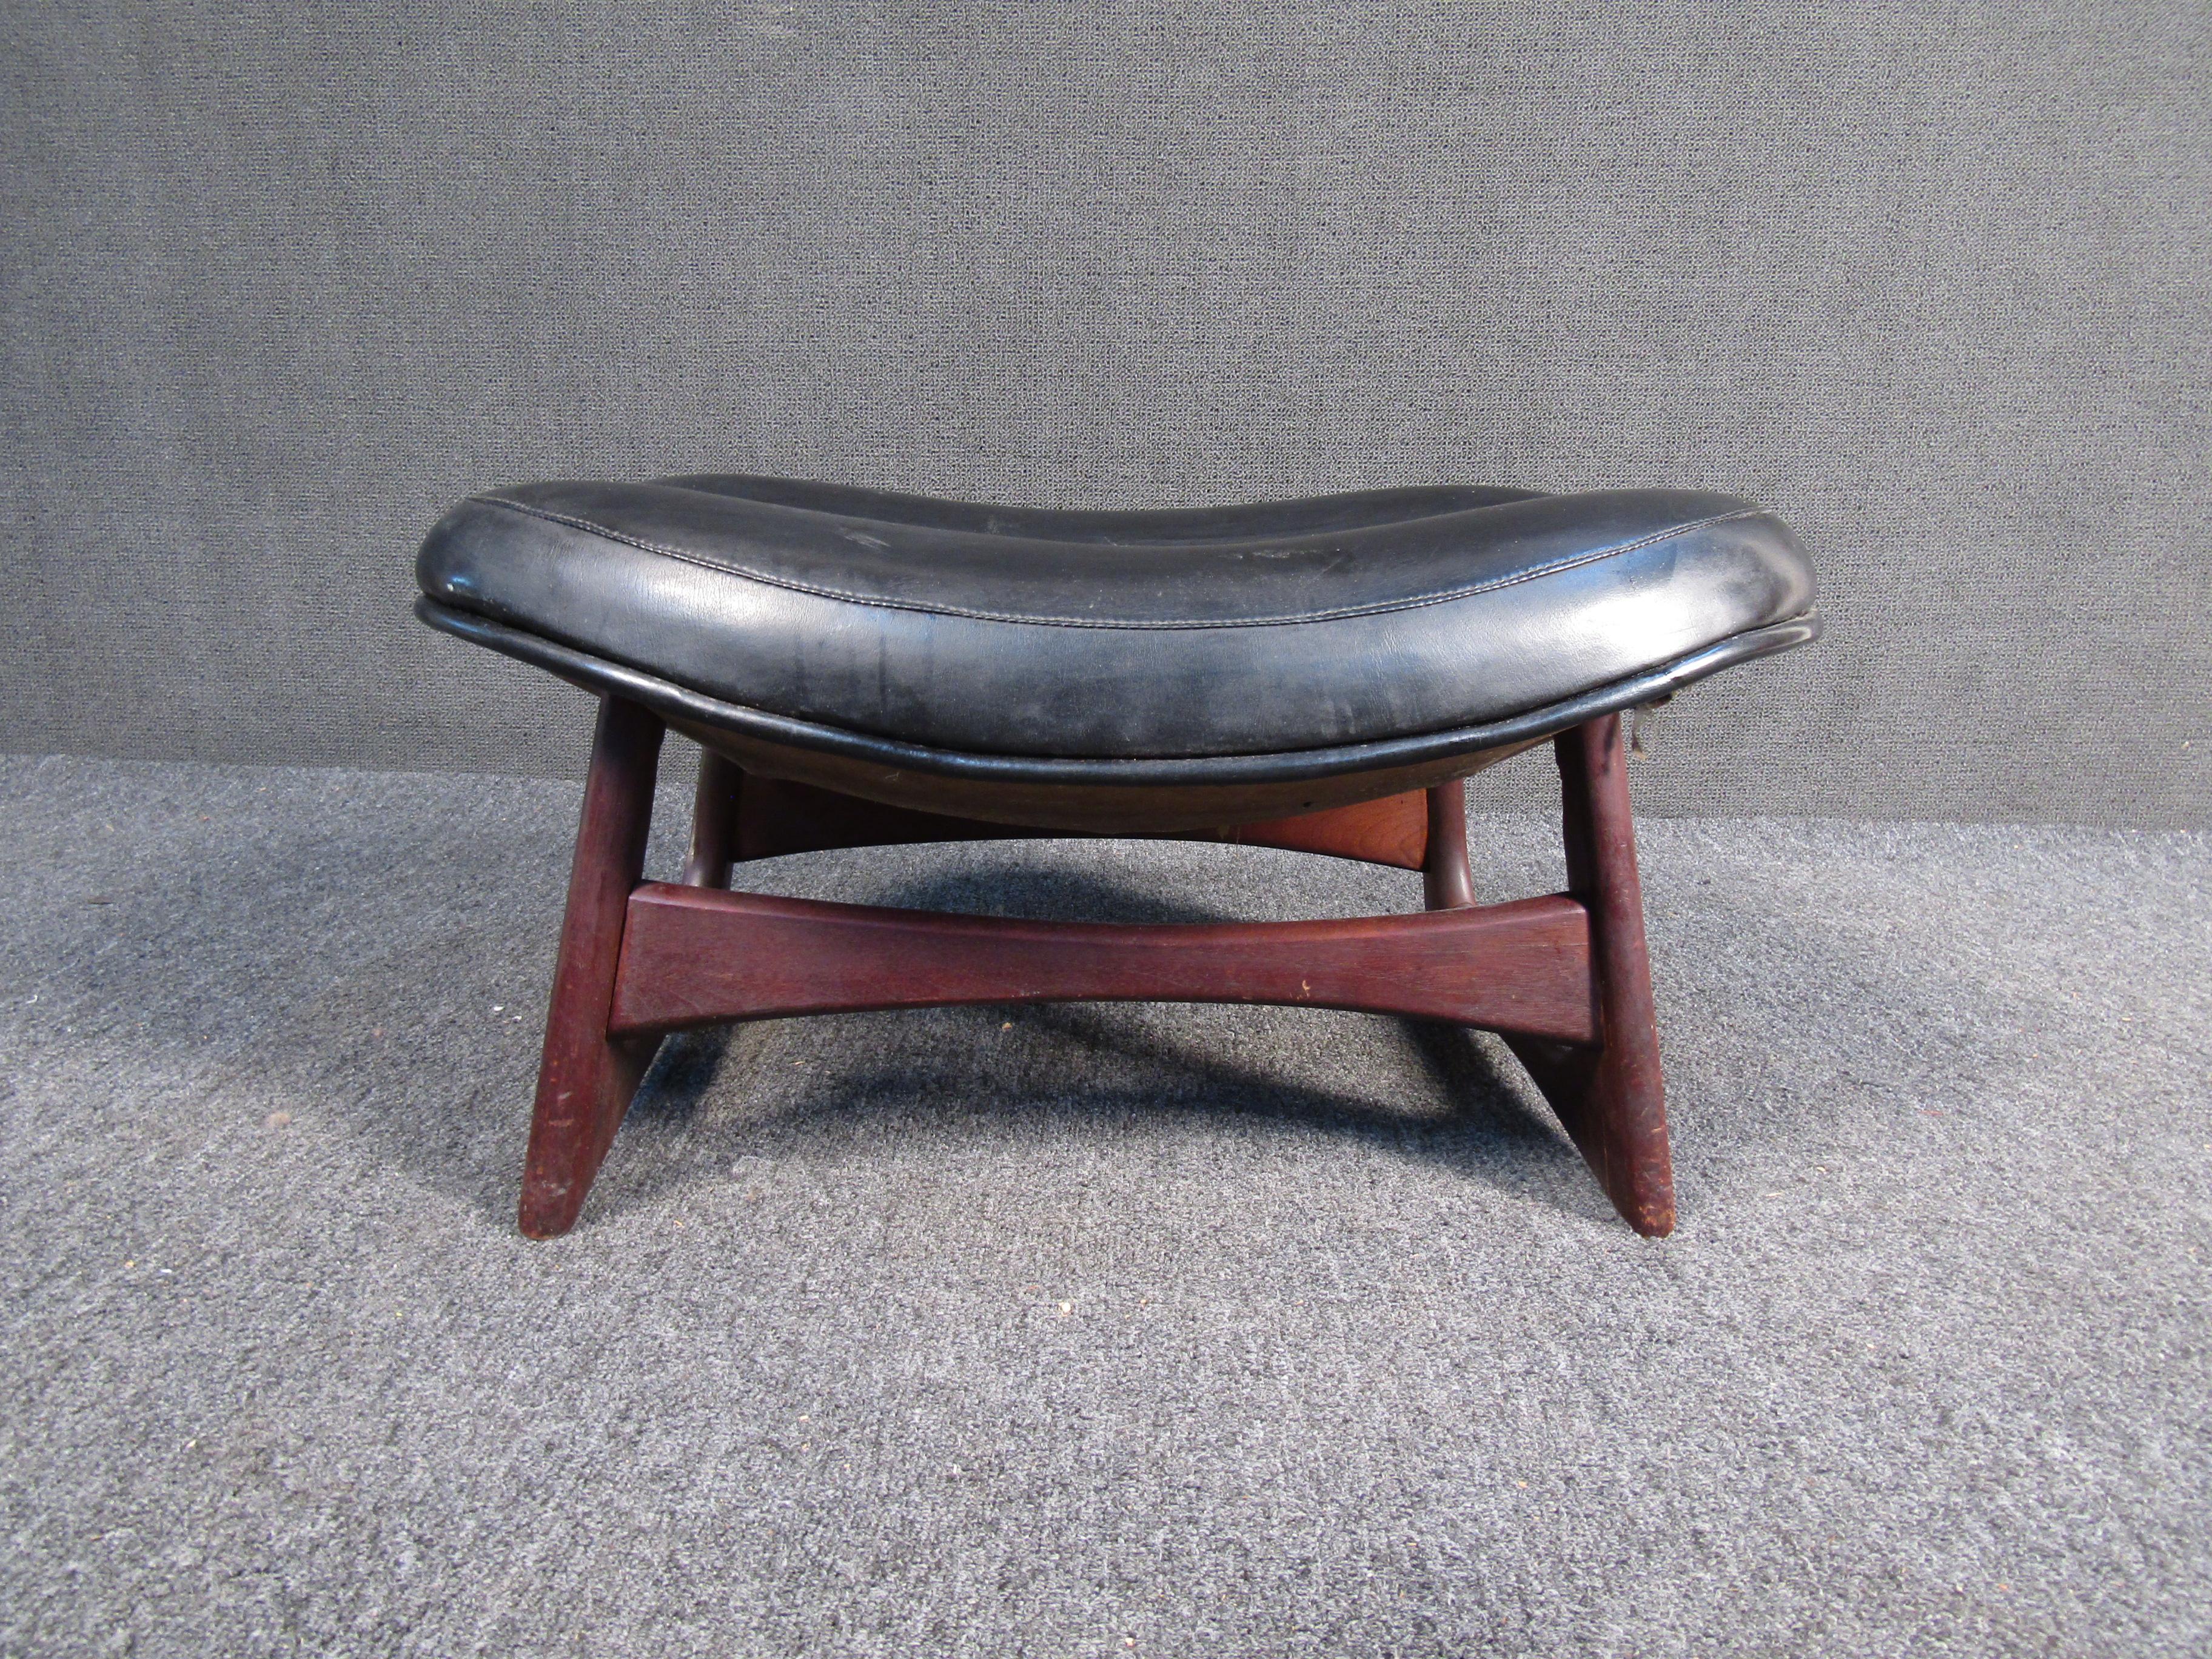 Vintage foot stool ottoman features black leather top and finished wood frame. Unique cross beams connect each leg adding sturdiness and style. The sleek black top is padded for comfort making this Mid-Century stool ottoman the perfect addition to